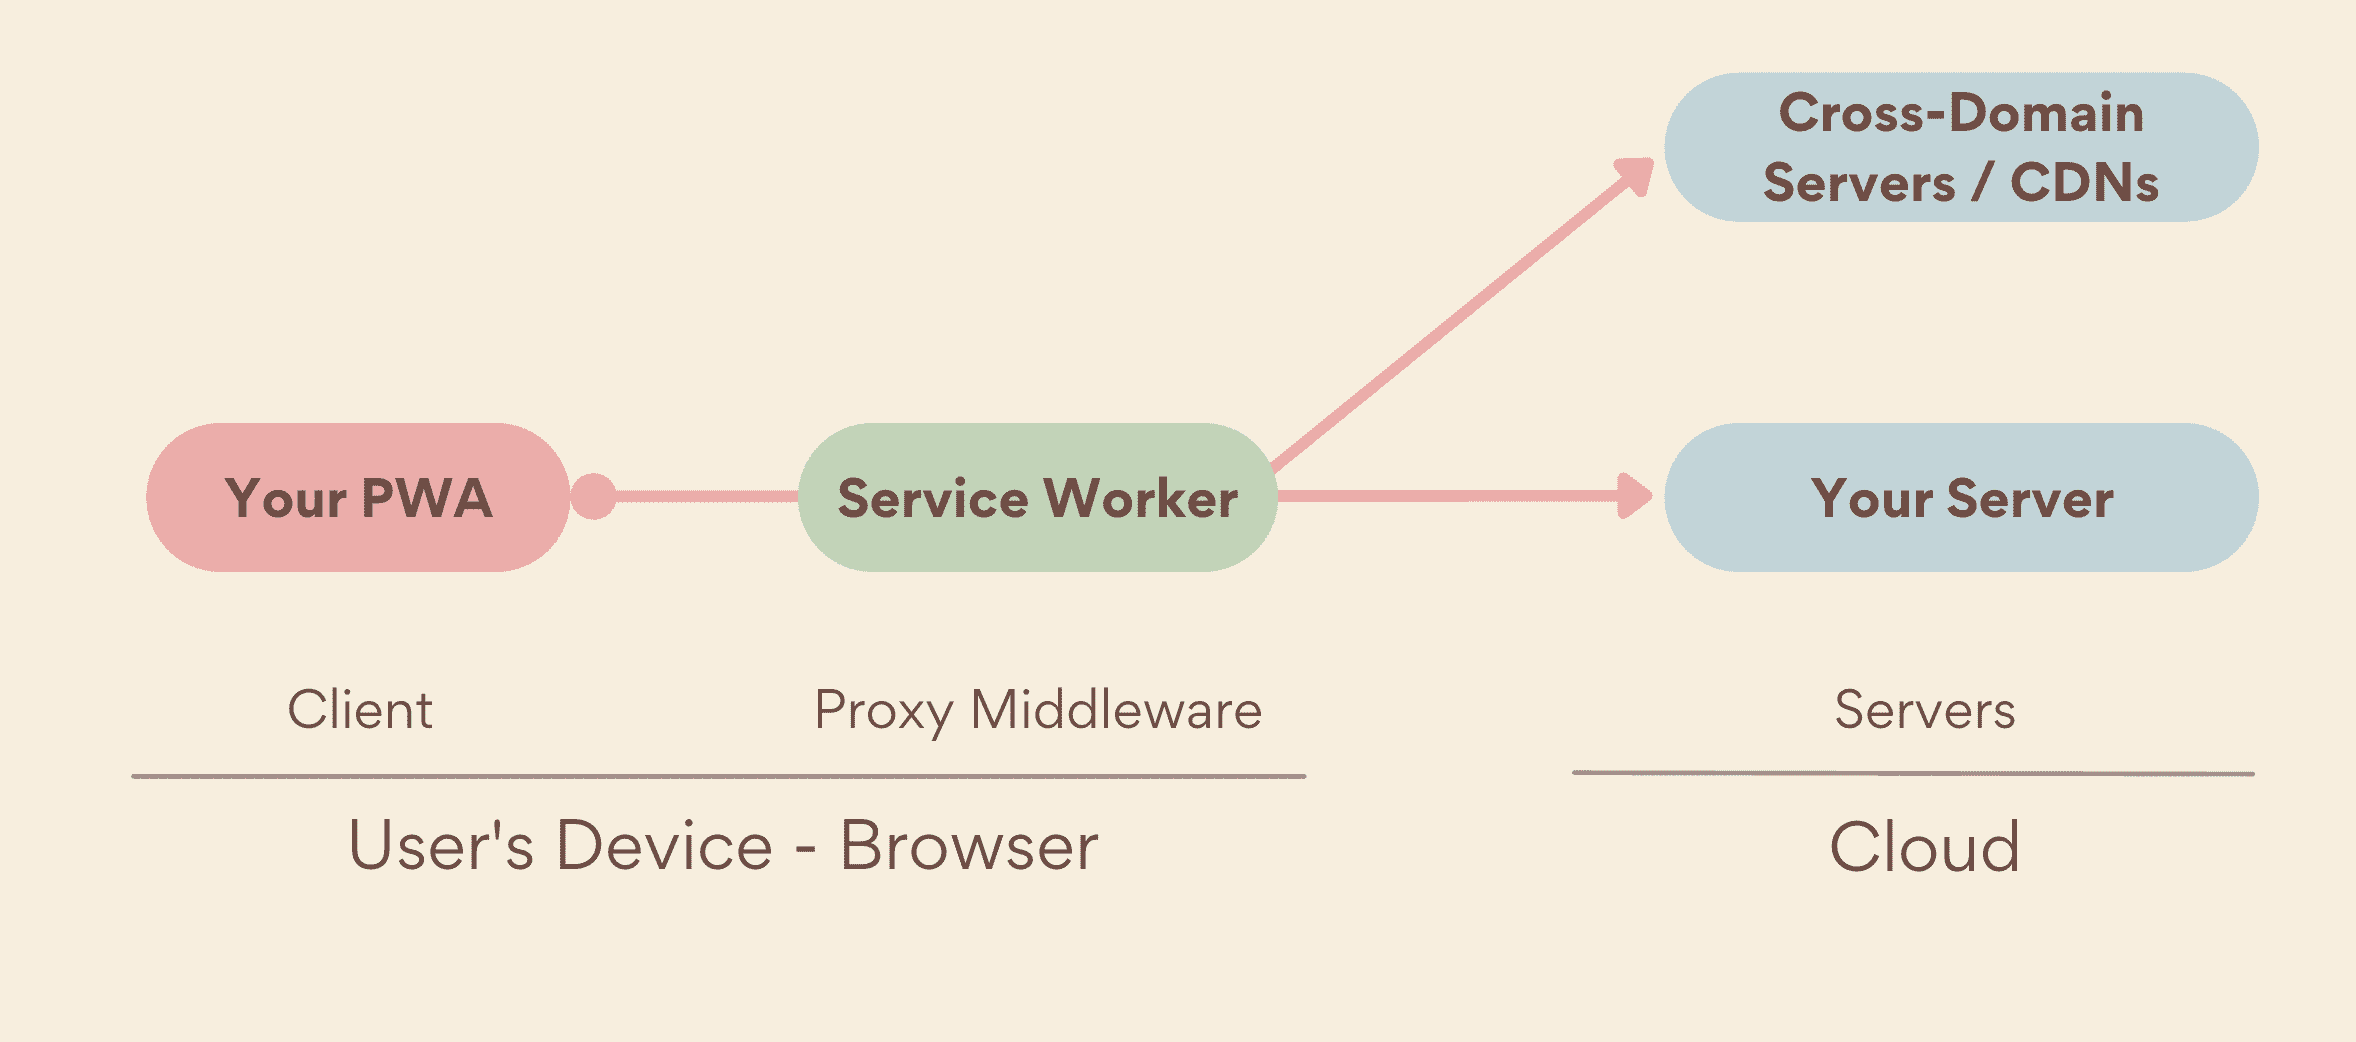 A service worker as a middleware proxy, running device-side, between your PWA and servers, which includes both your own servers and cross-domain servers.